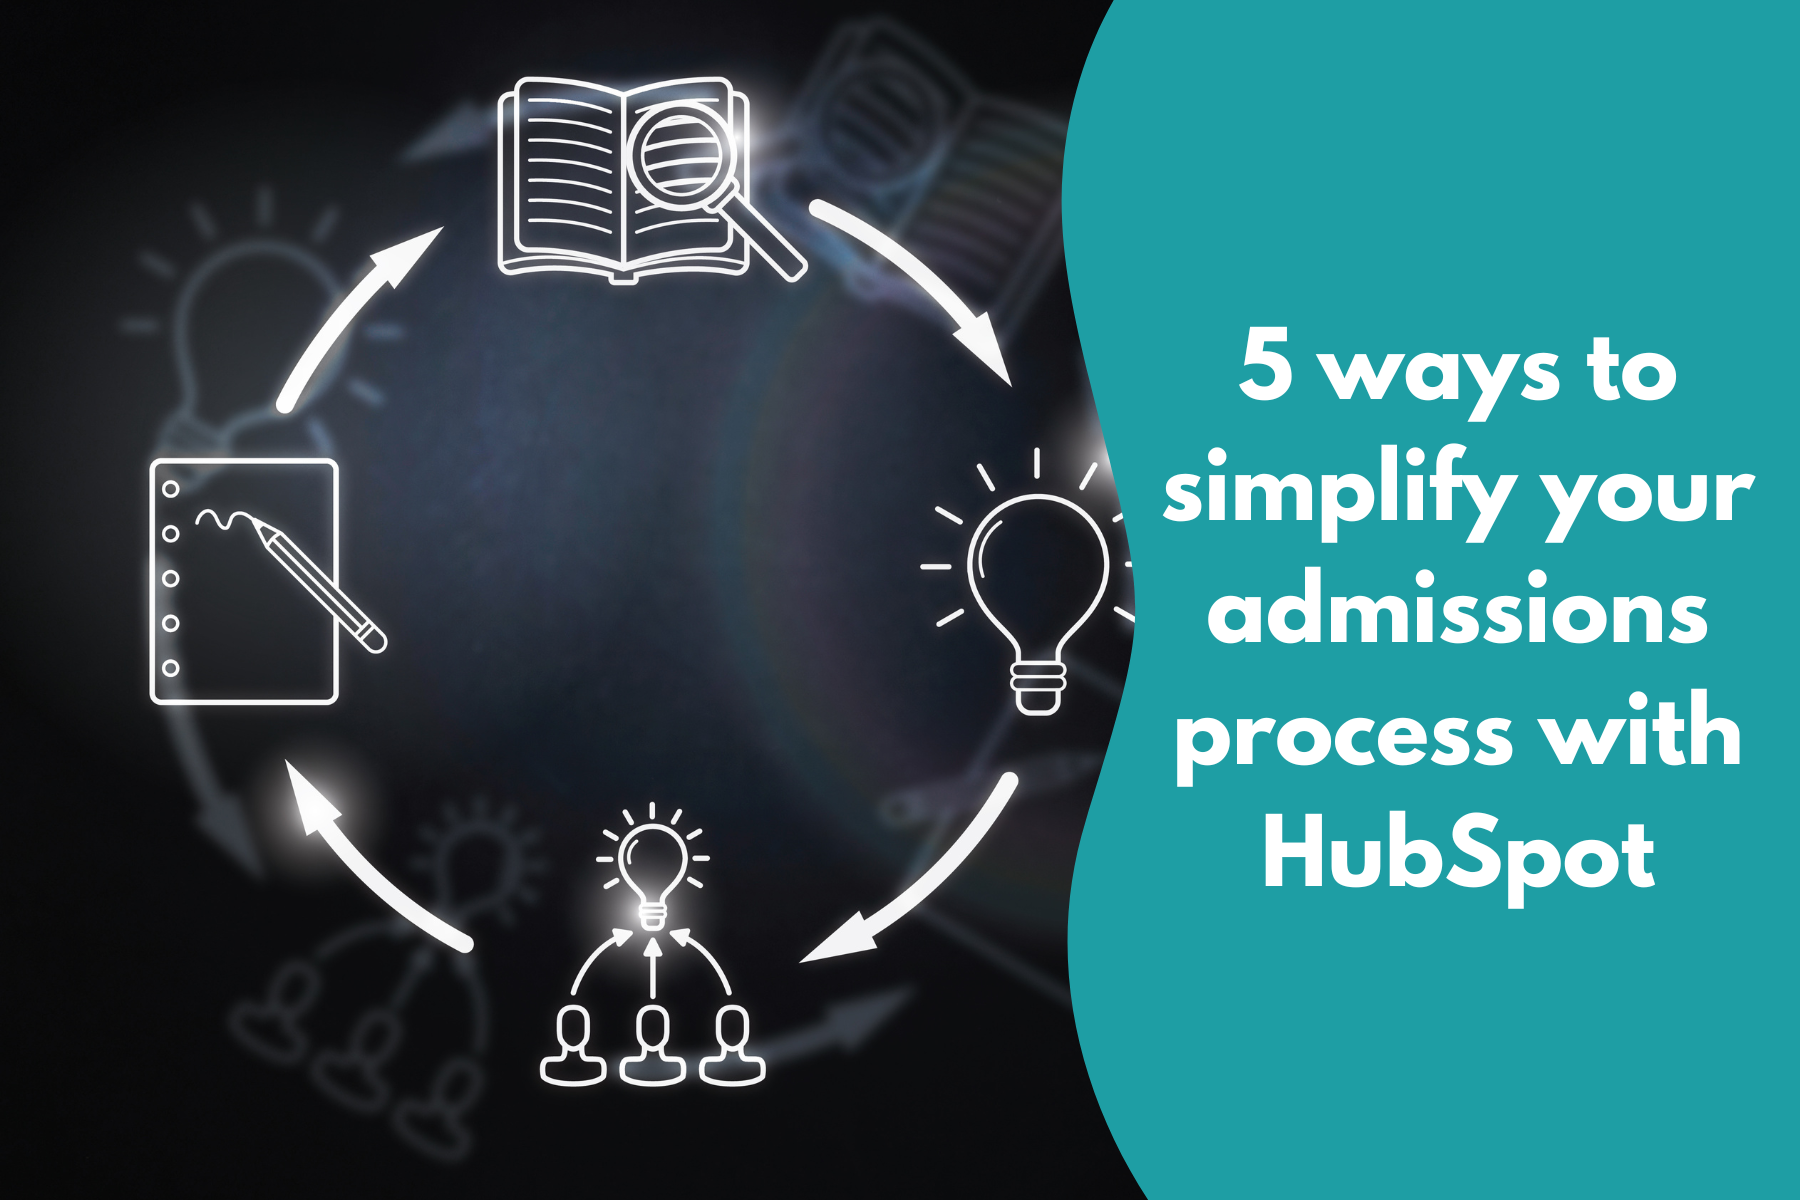 5 ways to simplify your admissions process with HubSpot